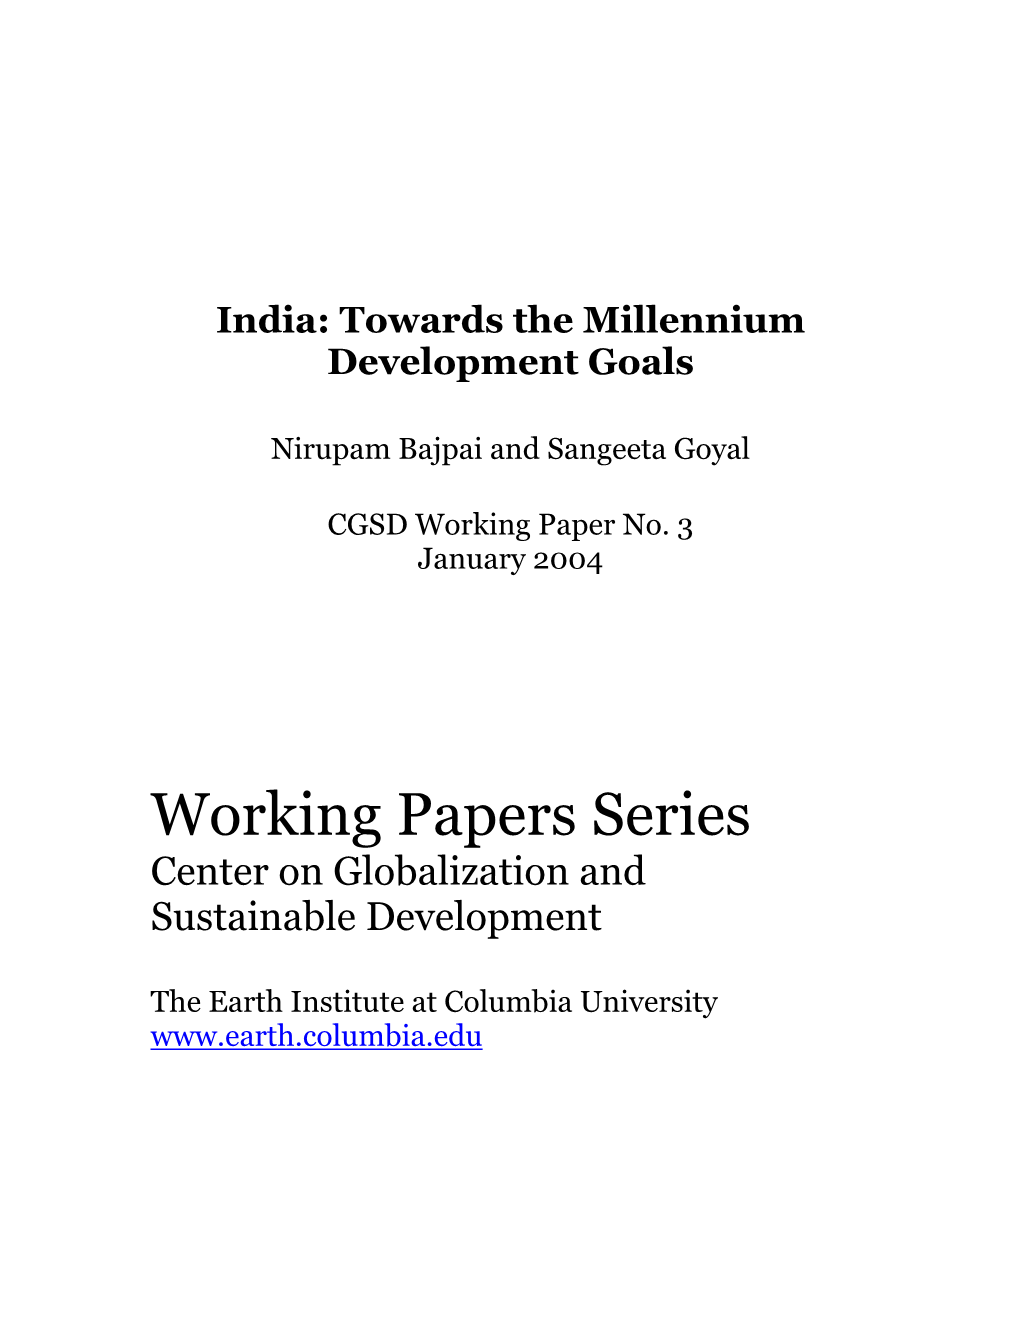 Working Papers Series Center on Globalization and Sustainable Development